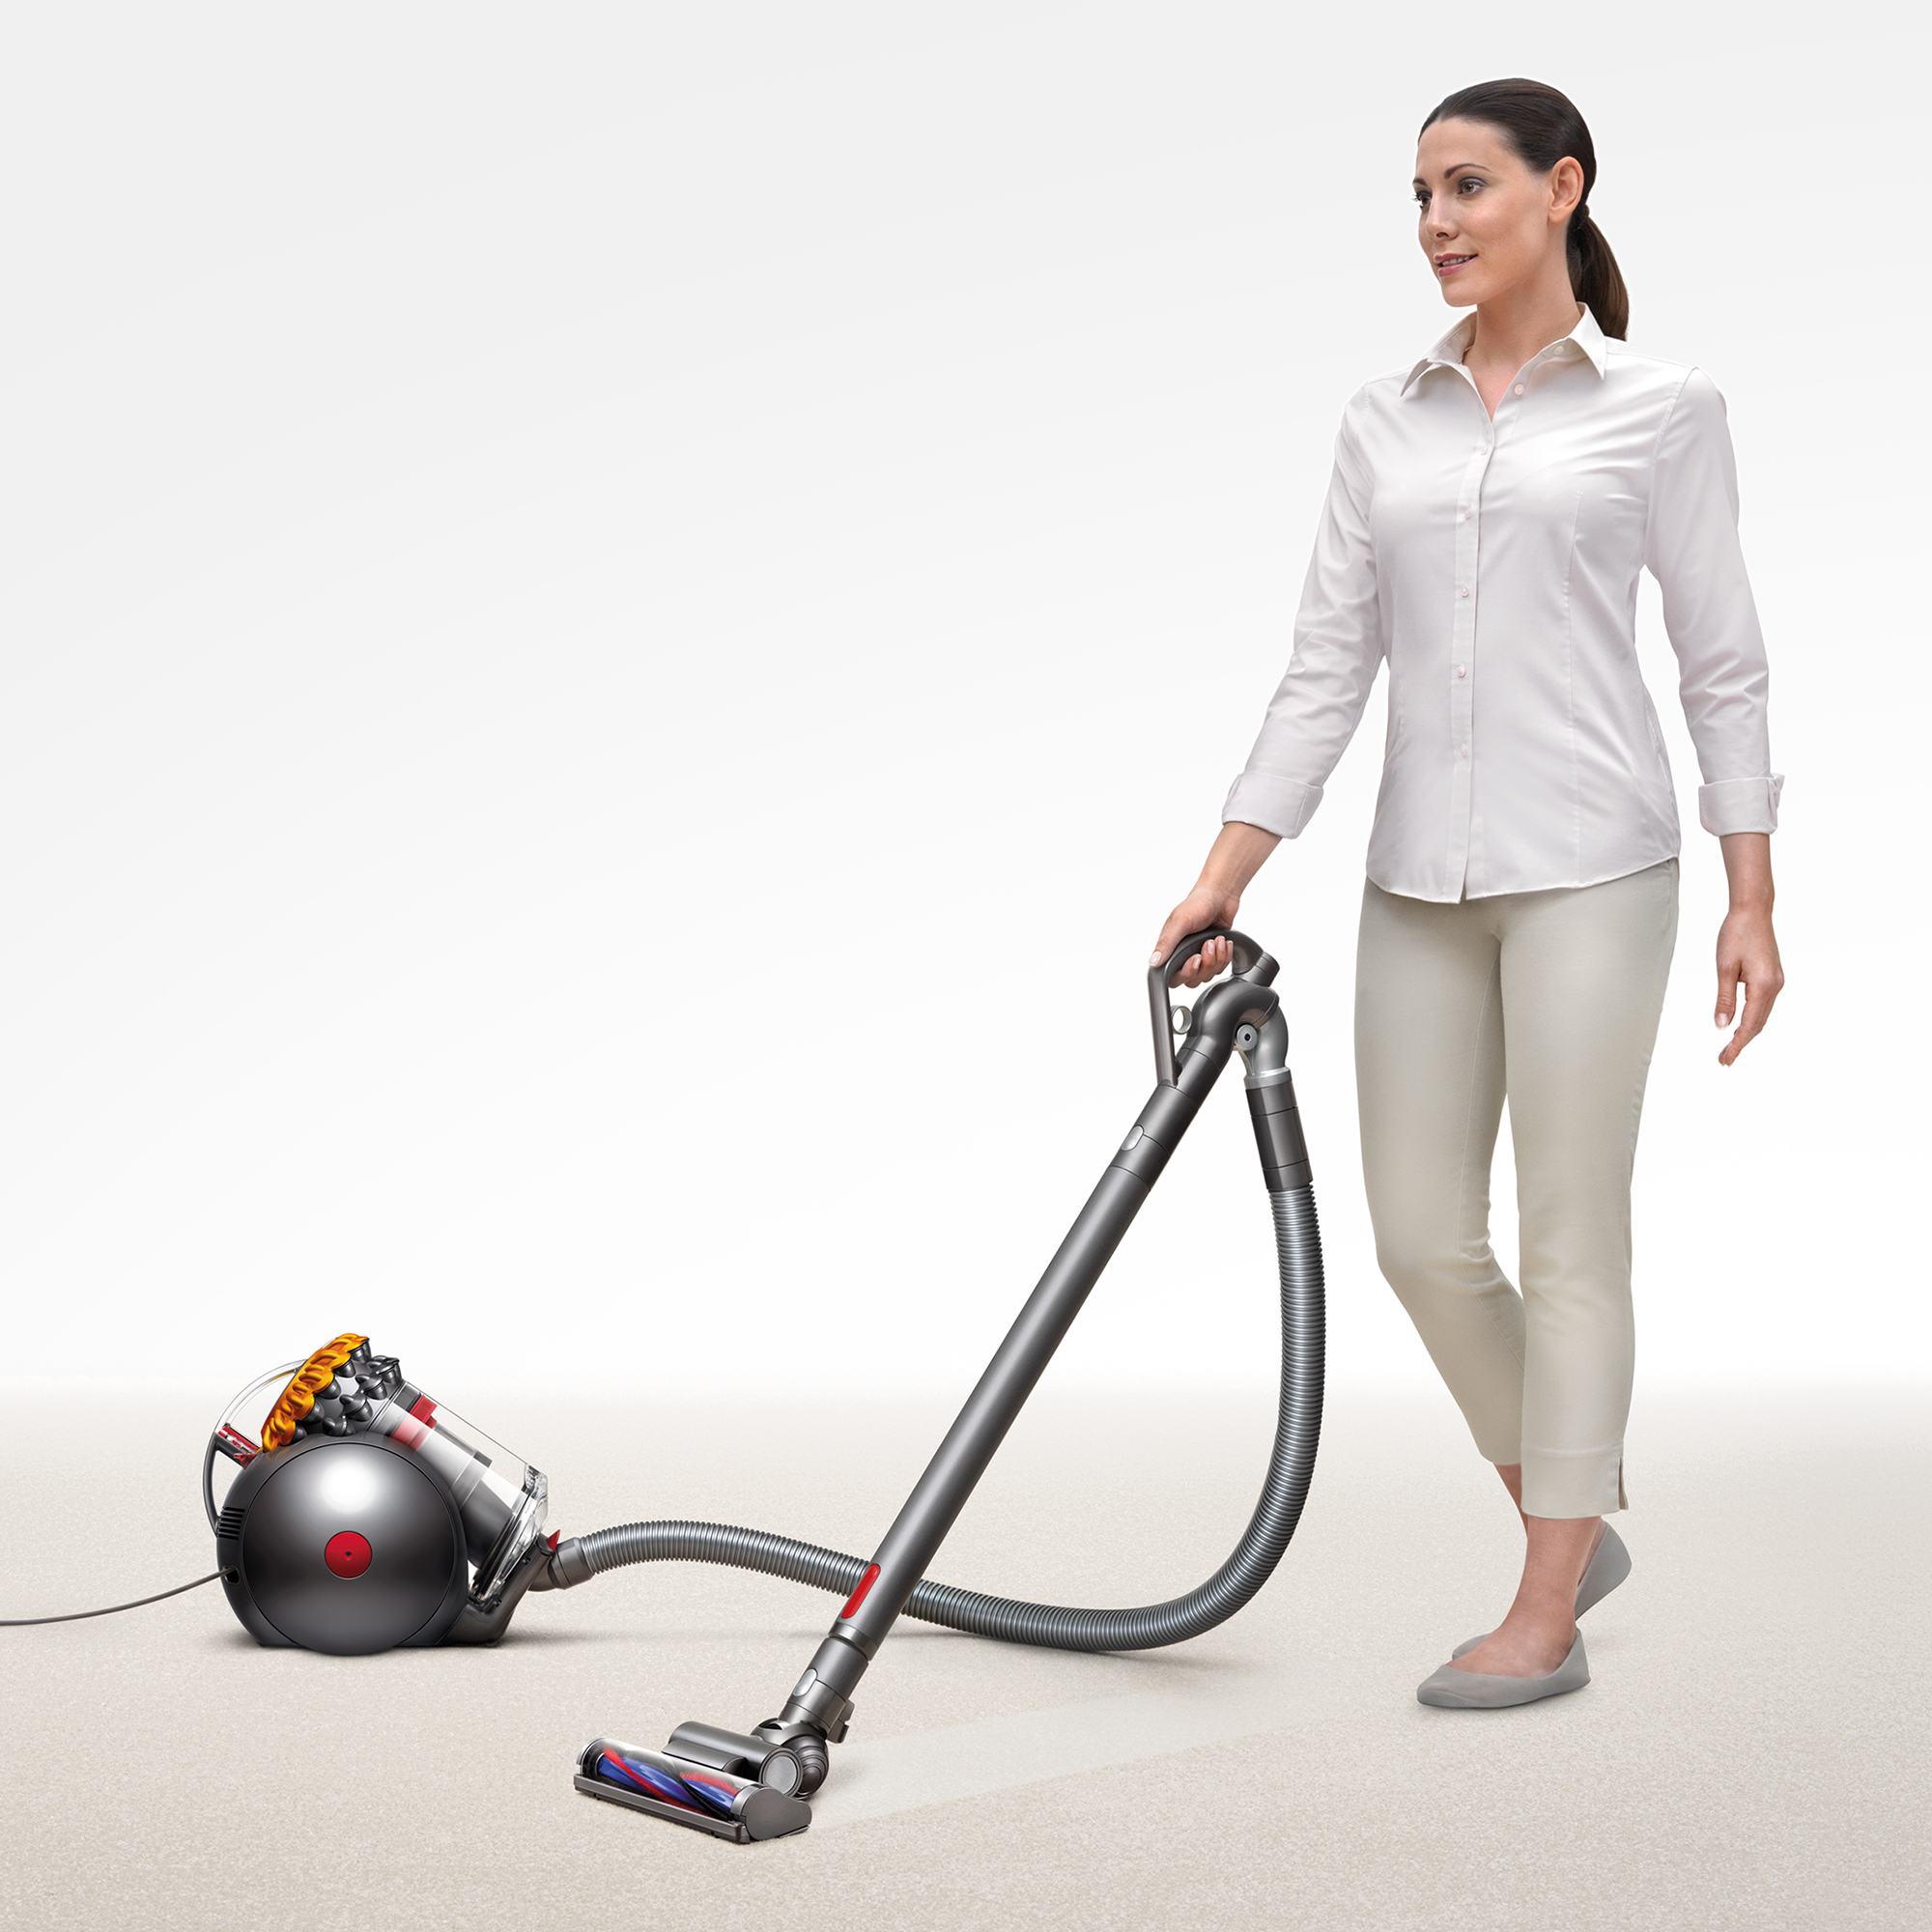 Dyson Big Ball Multi Floor Canister Vacuum | Yellow/Iron | New - image 2 of 6